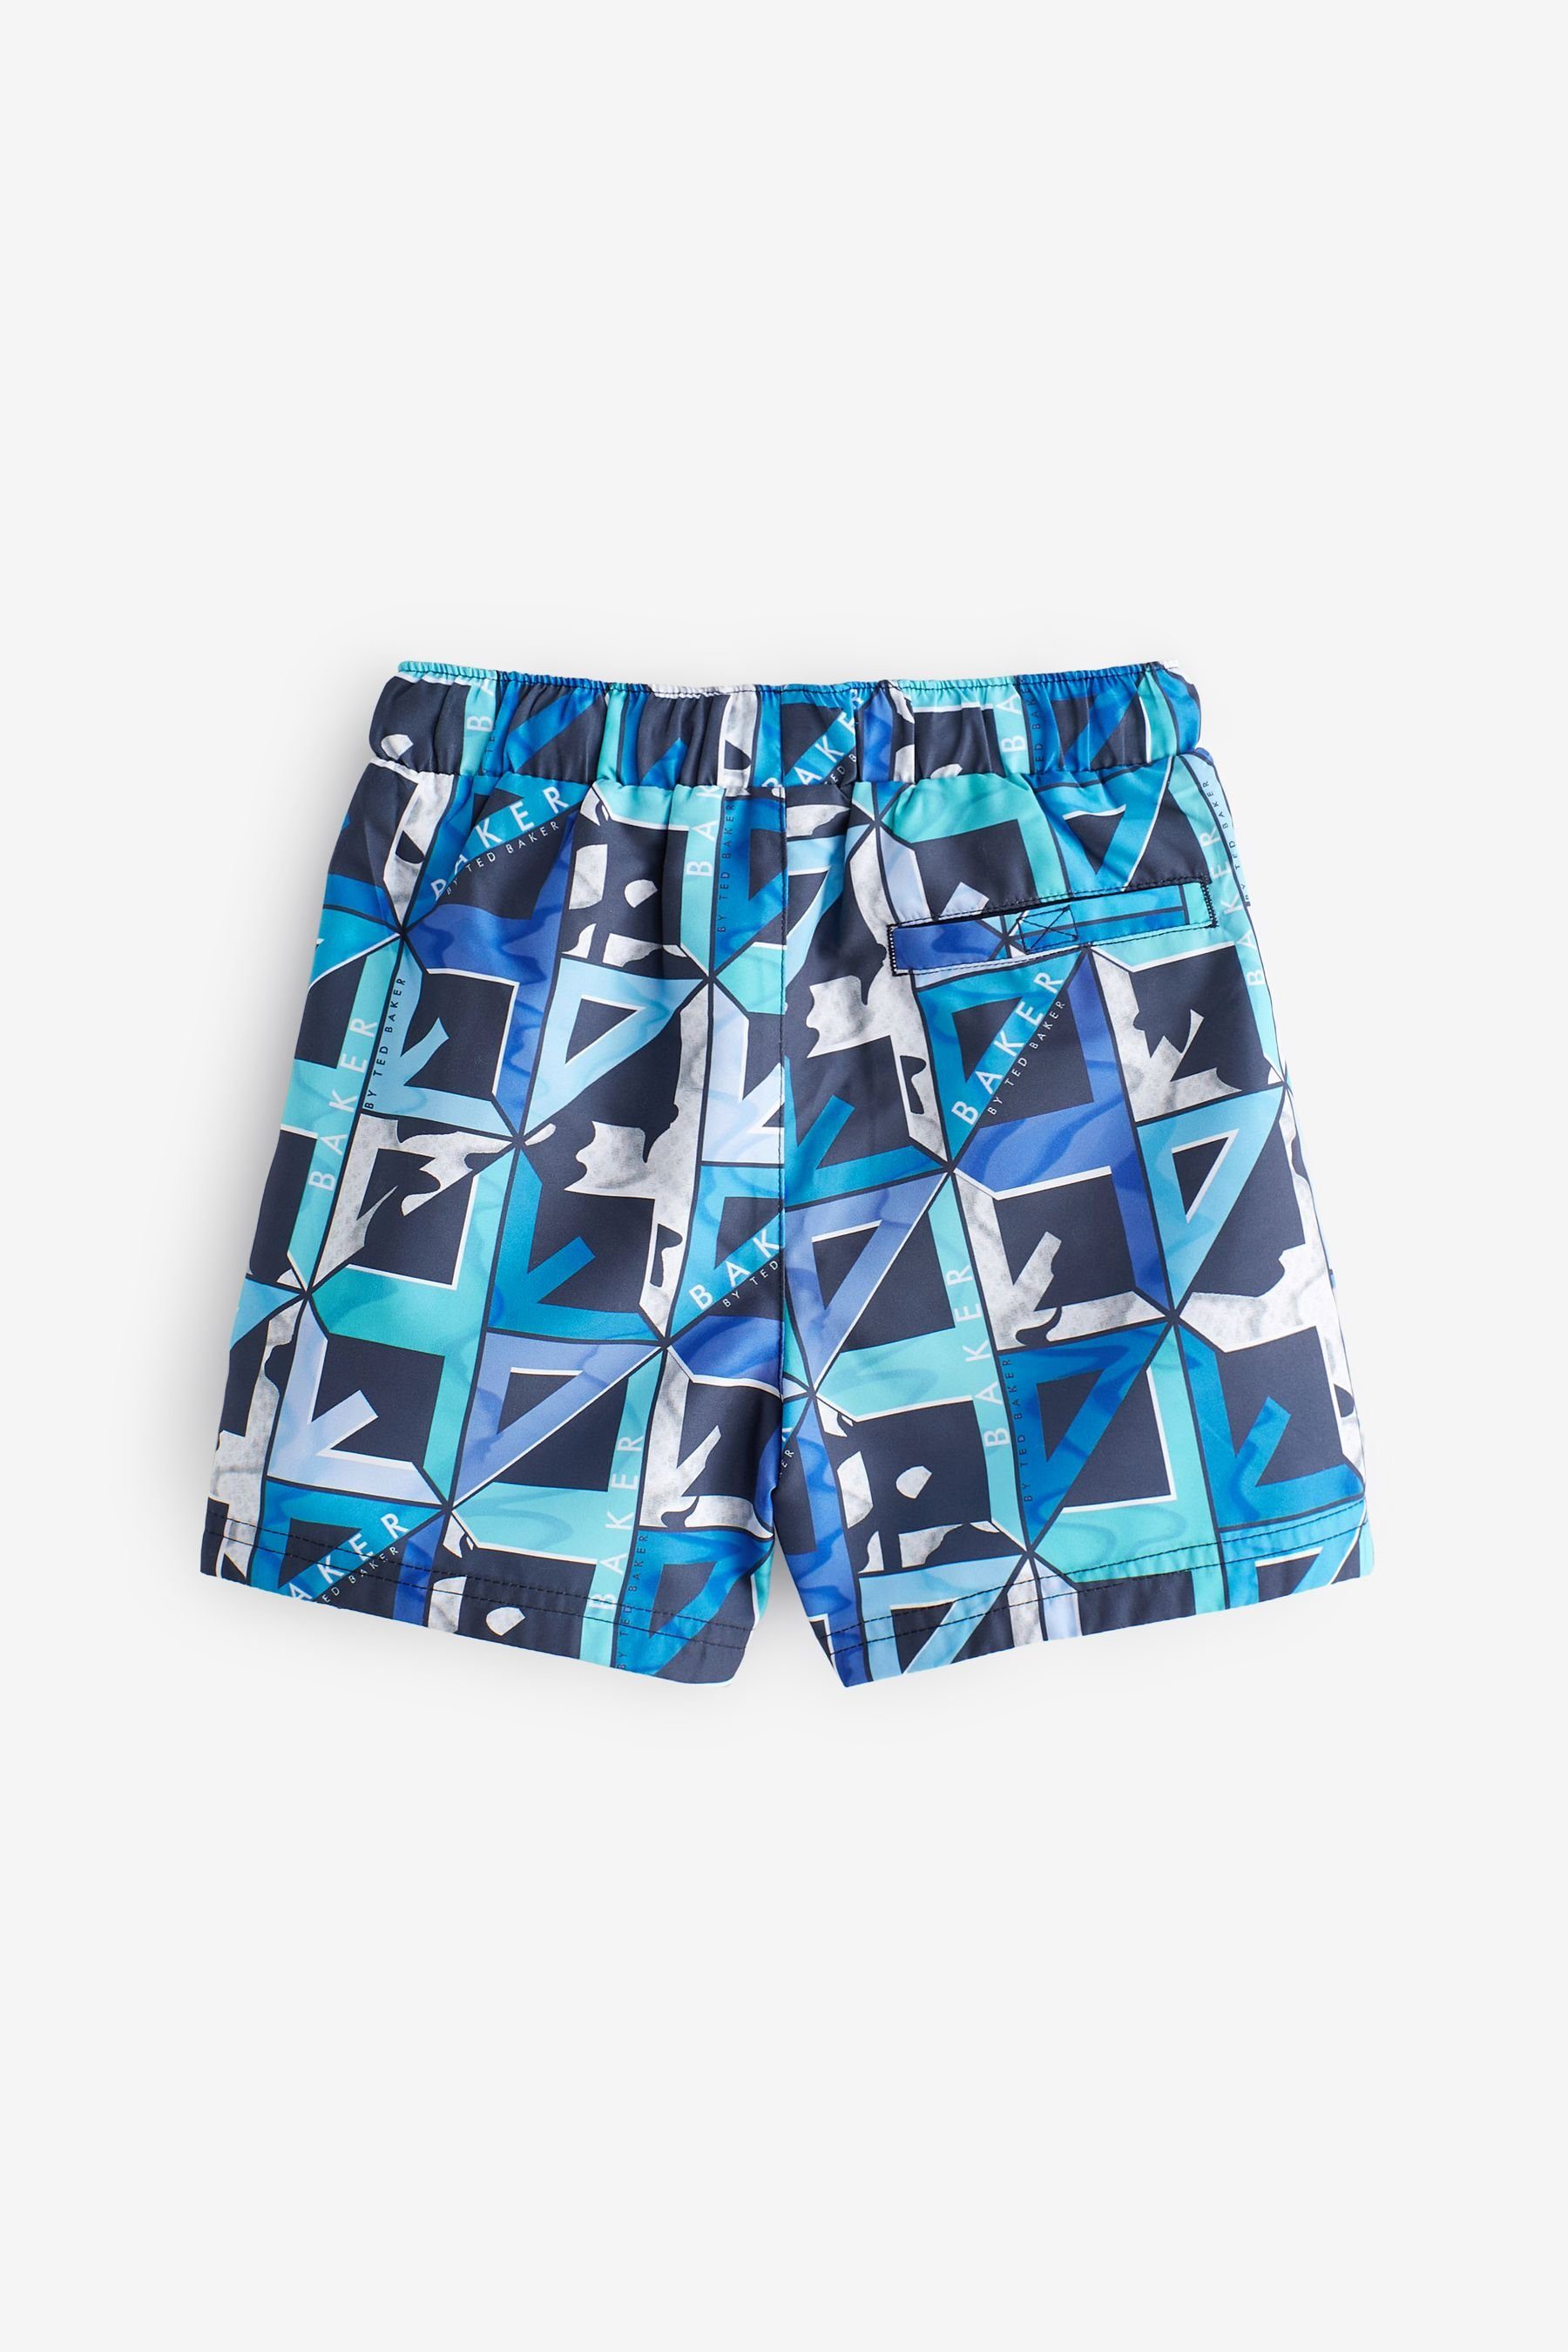 Baker Baker by Baker Navy/Blue (1-St) Badeshorts Baker Ted Ted Badehose by